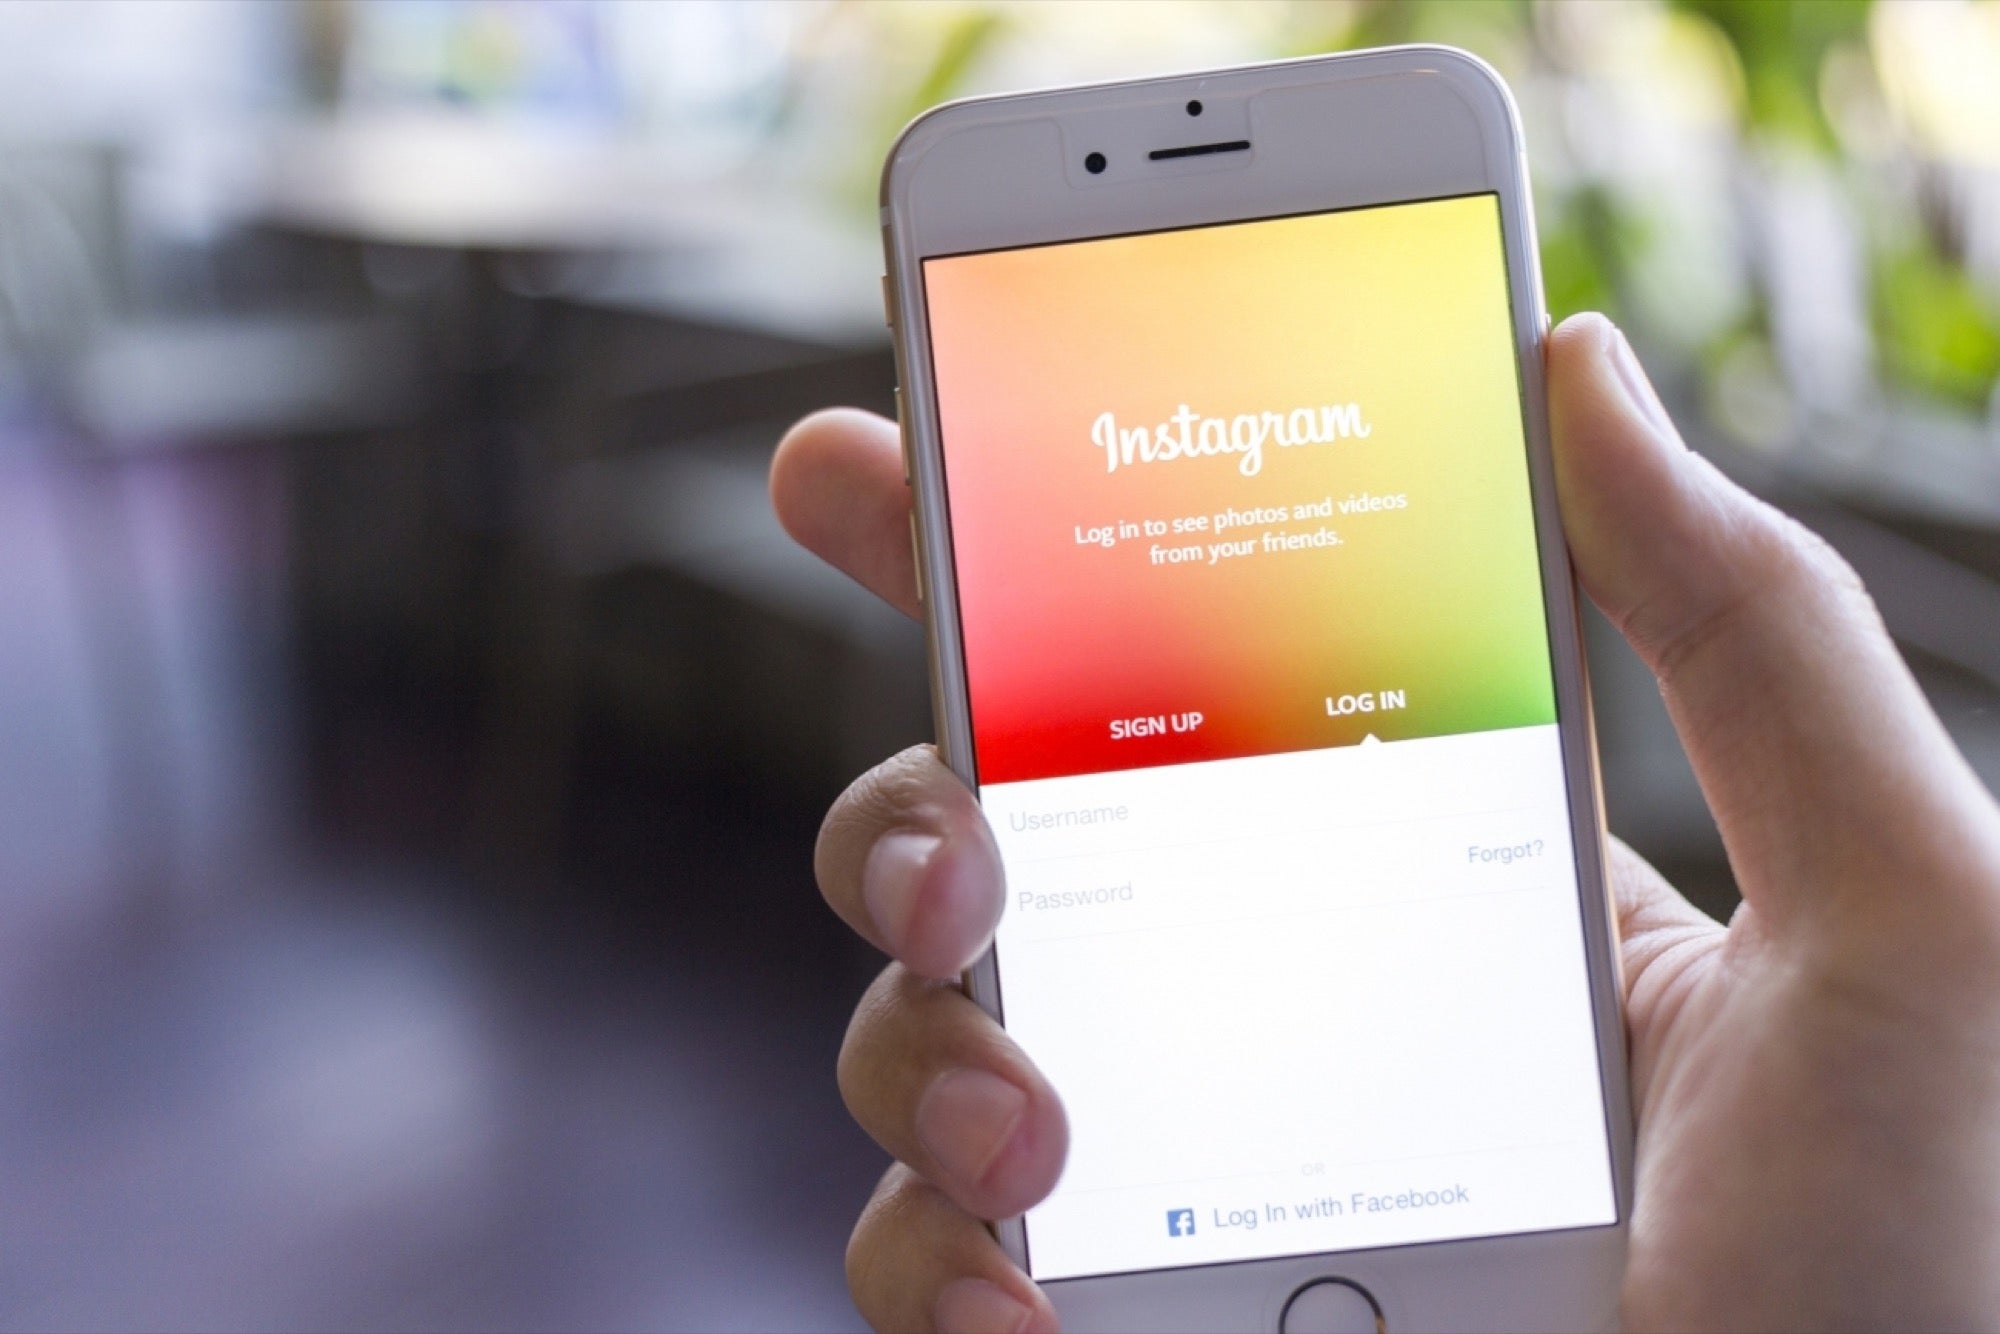 How Can You Use Instagram For Product Launches?